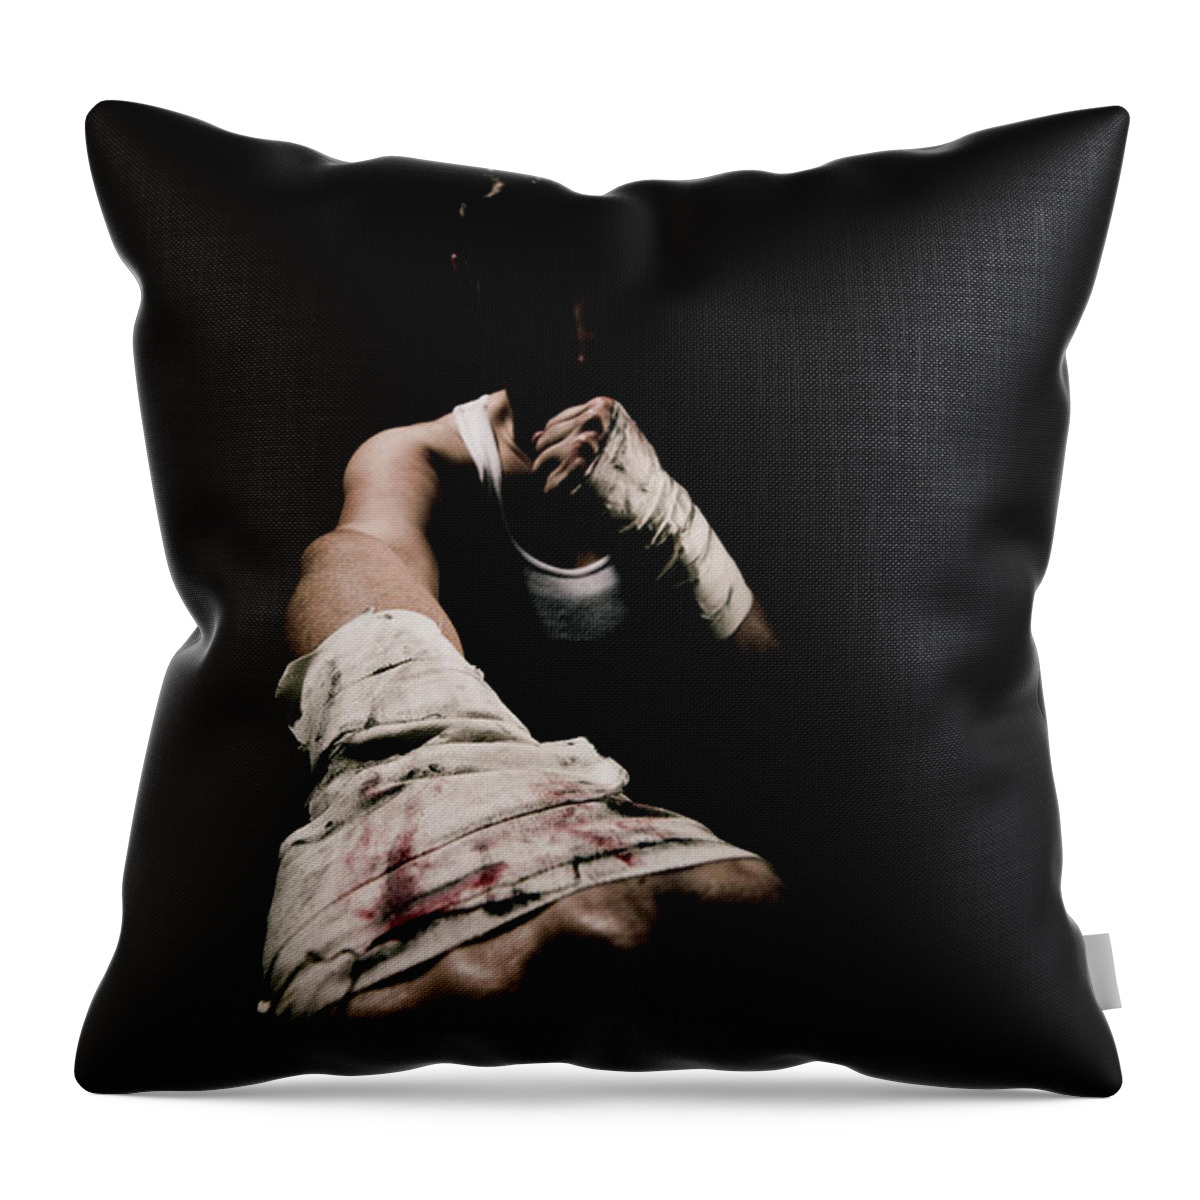 Boxing Throw Pillow featuring the photograph Female Toughness by Scott Sawyer